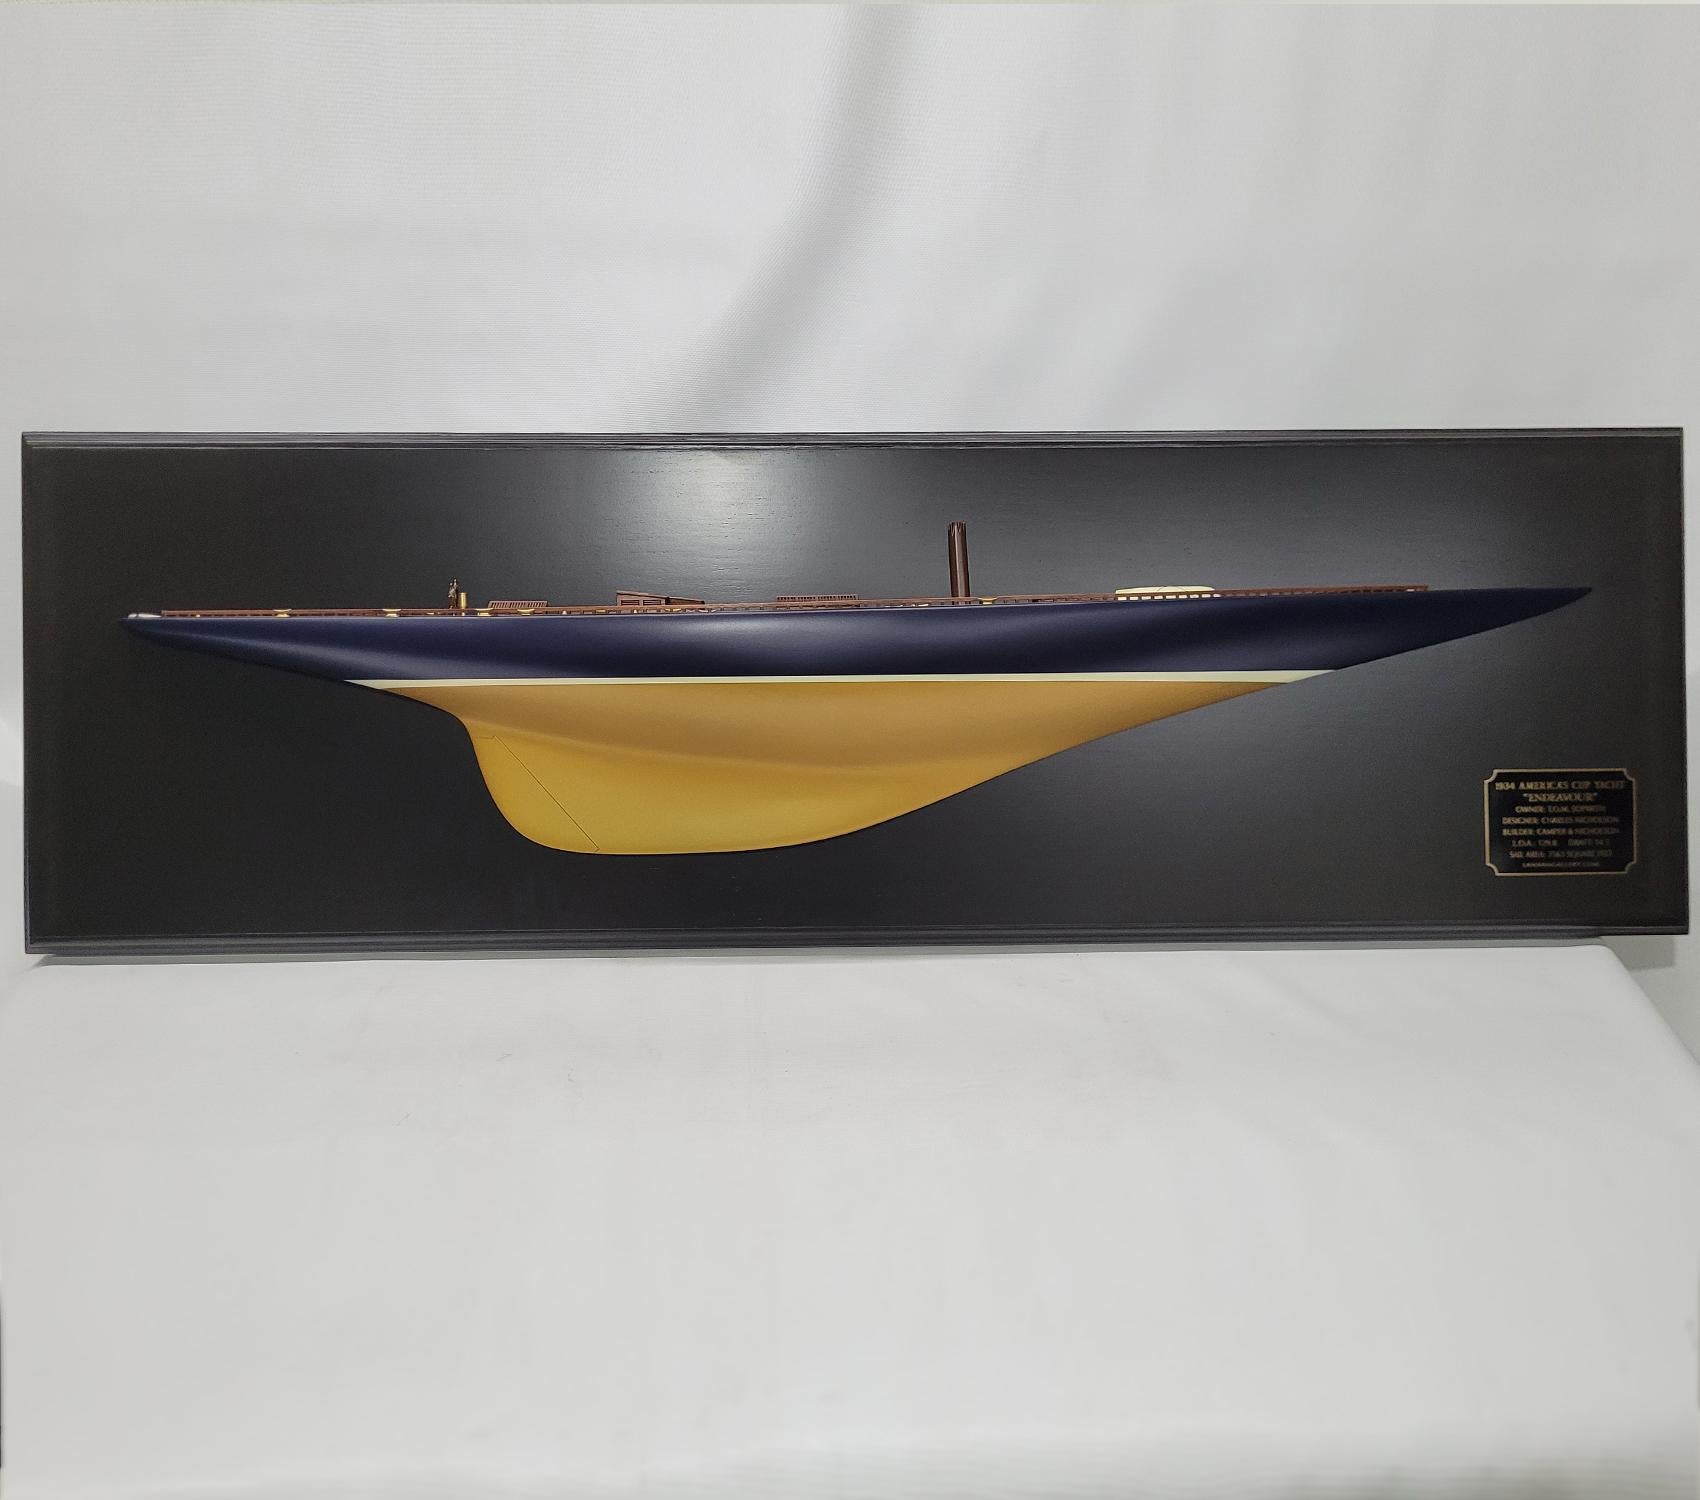 Half model of the America’s cup Yacht Endeavor. This is a 4-foot hull mounted to a blackboard. The Hull is painted blue over gold. The planked deck has skylights, Companionway, Spinnaker pole, Lifeboat, Cleats, Toe rail, Etc. Mounted to a varnished